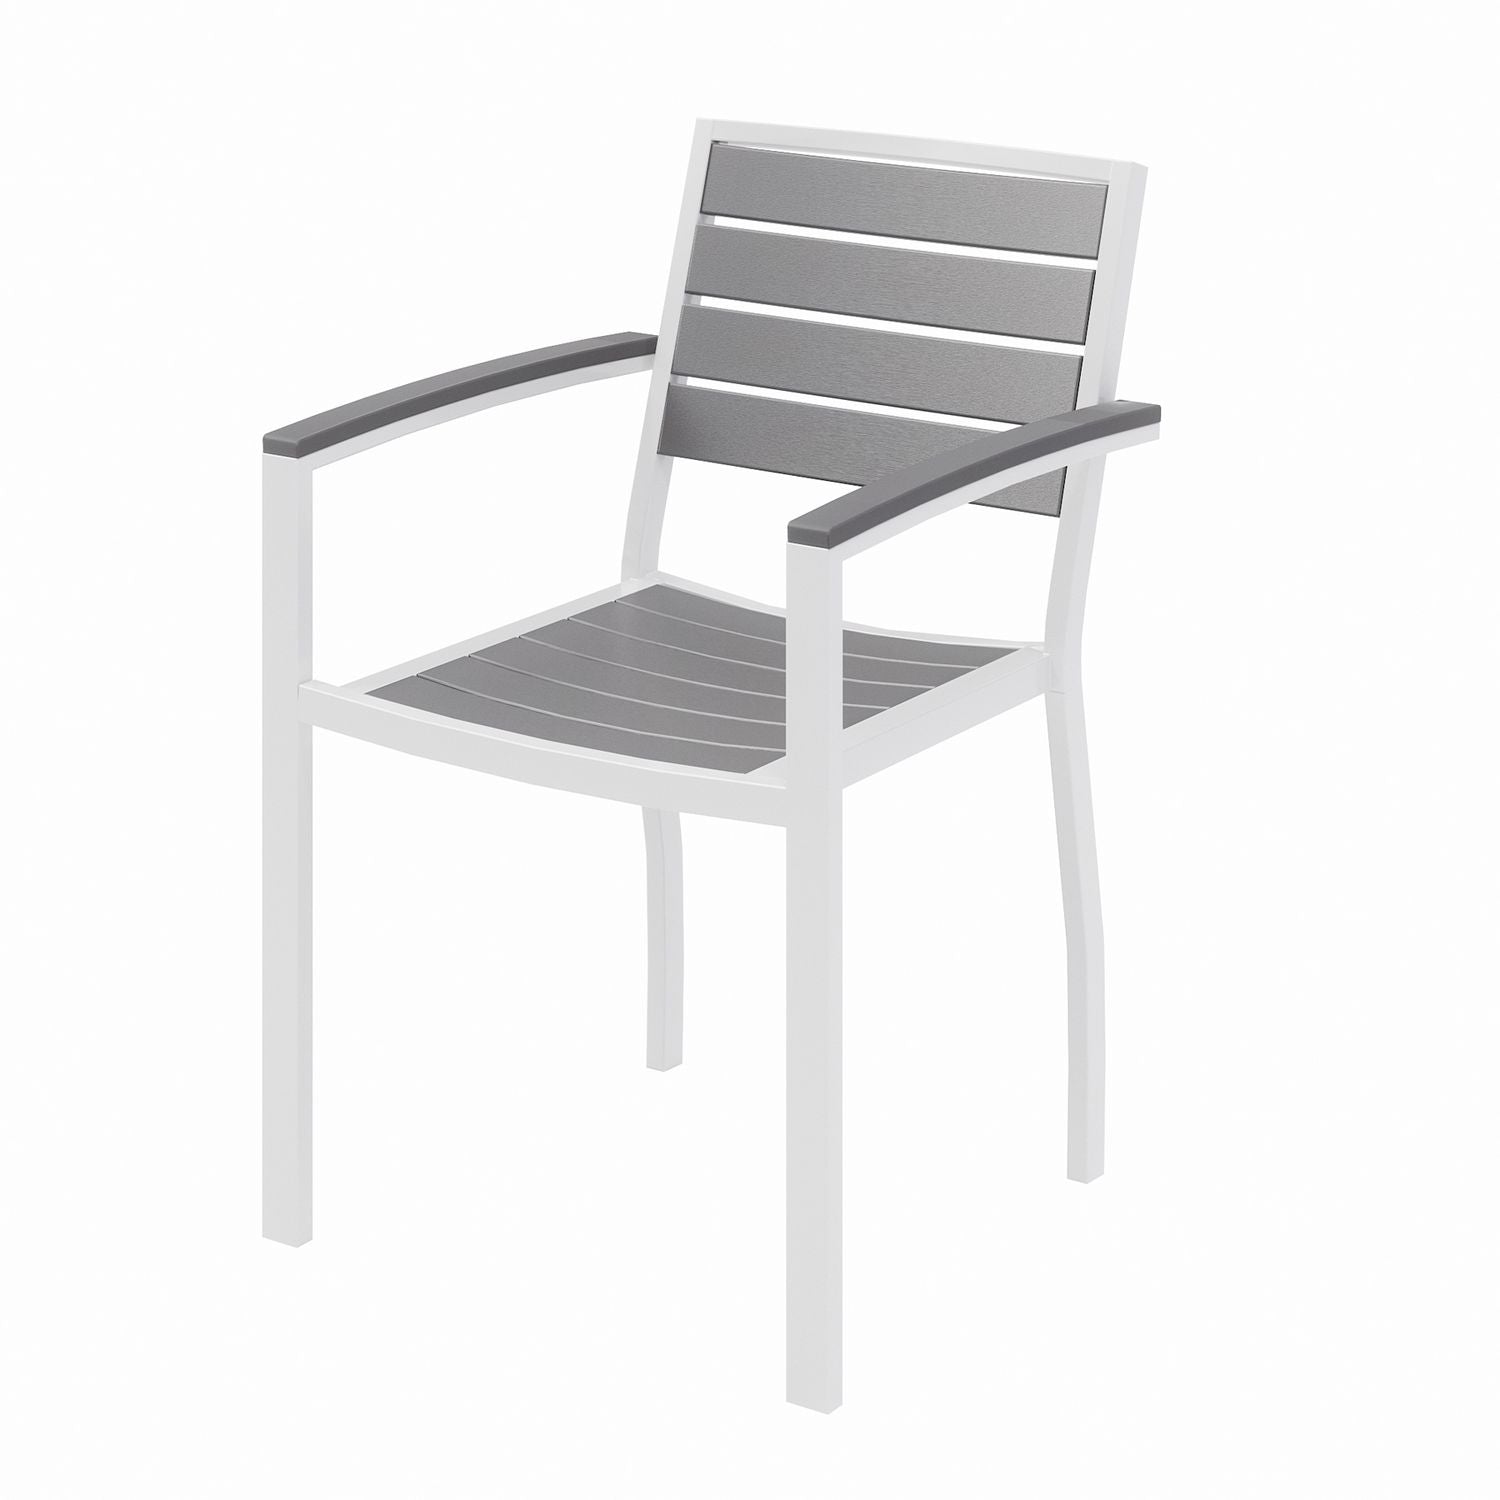 eveleen-outdoor-patio-table-with-2-gray-powder-coated-polymer-chairs-30-dia-x-29h-designer-white-ships-in-4-6-bus-days_kfi840031918451 - 3